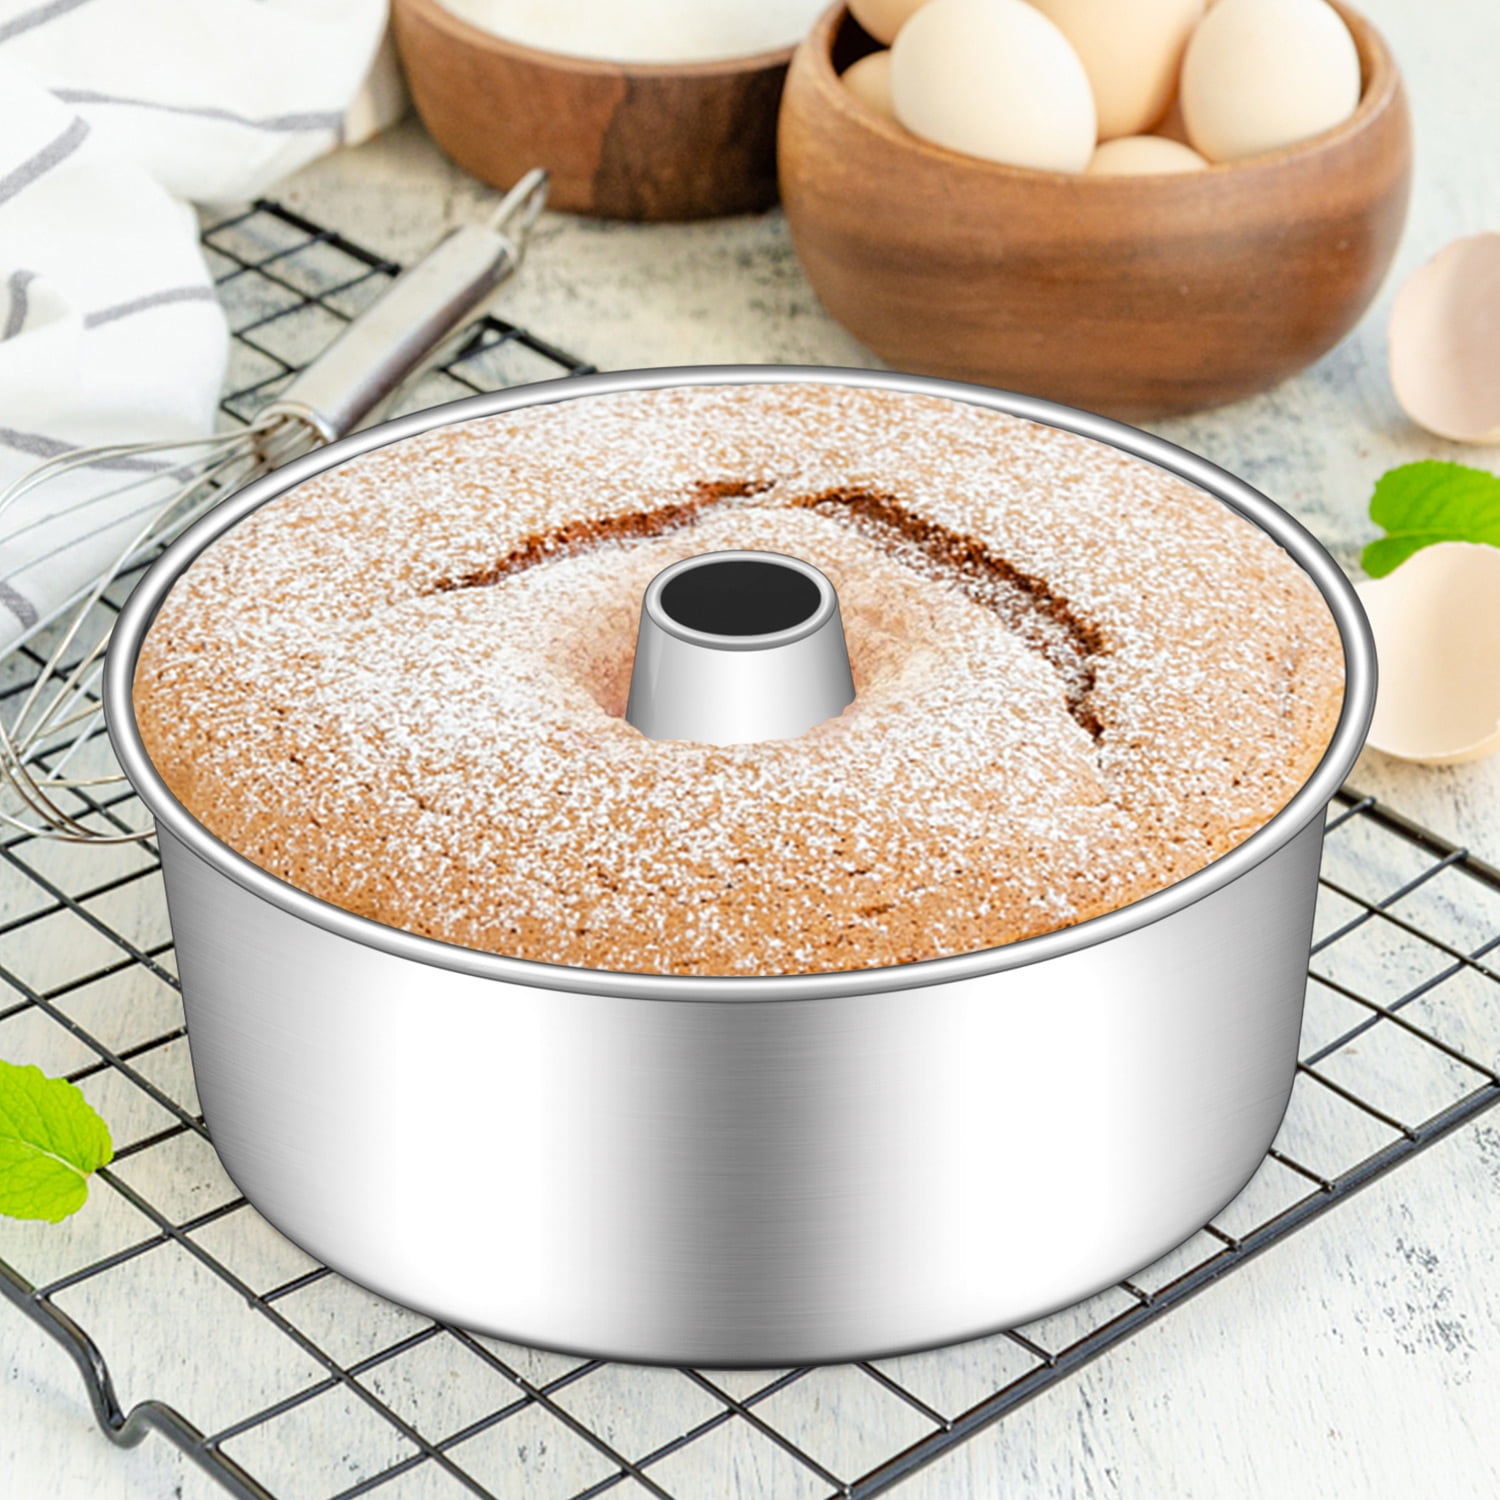 Vesteel 10 inch Angel Food Cake Pan, Stainless Steel Pound Cake Mold with  Tube 16 Cups Tube Pan, Non-toxic & One-Piece Design 